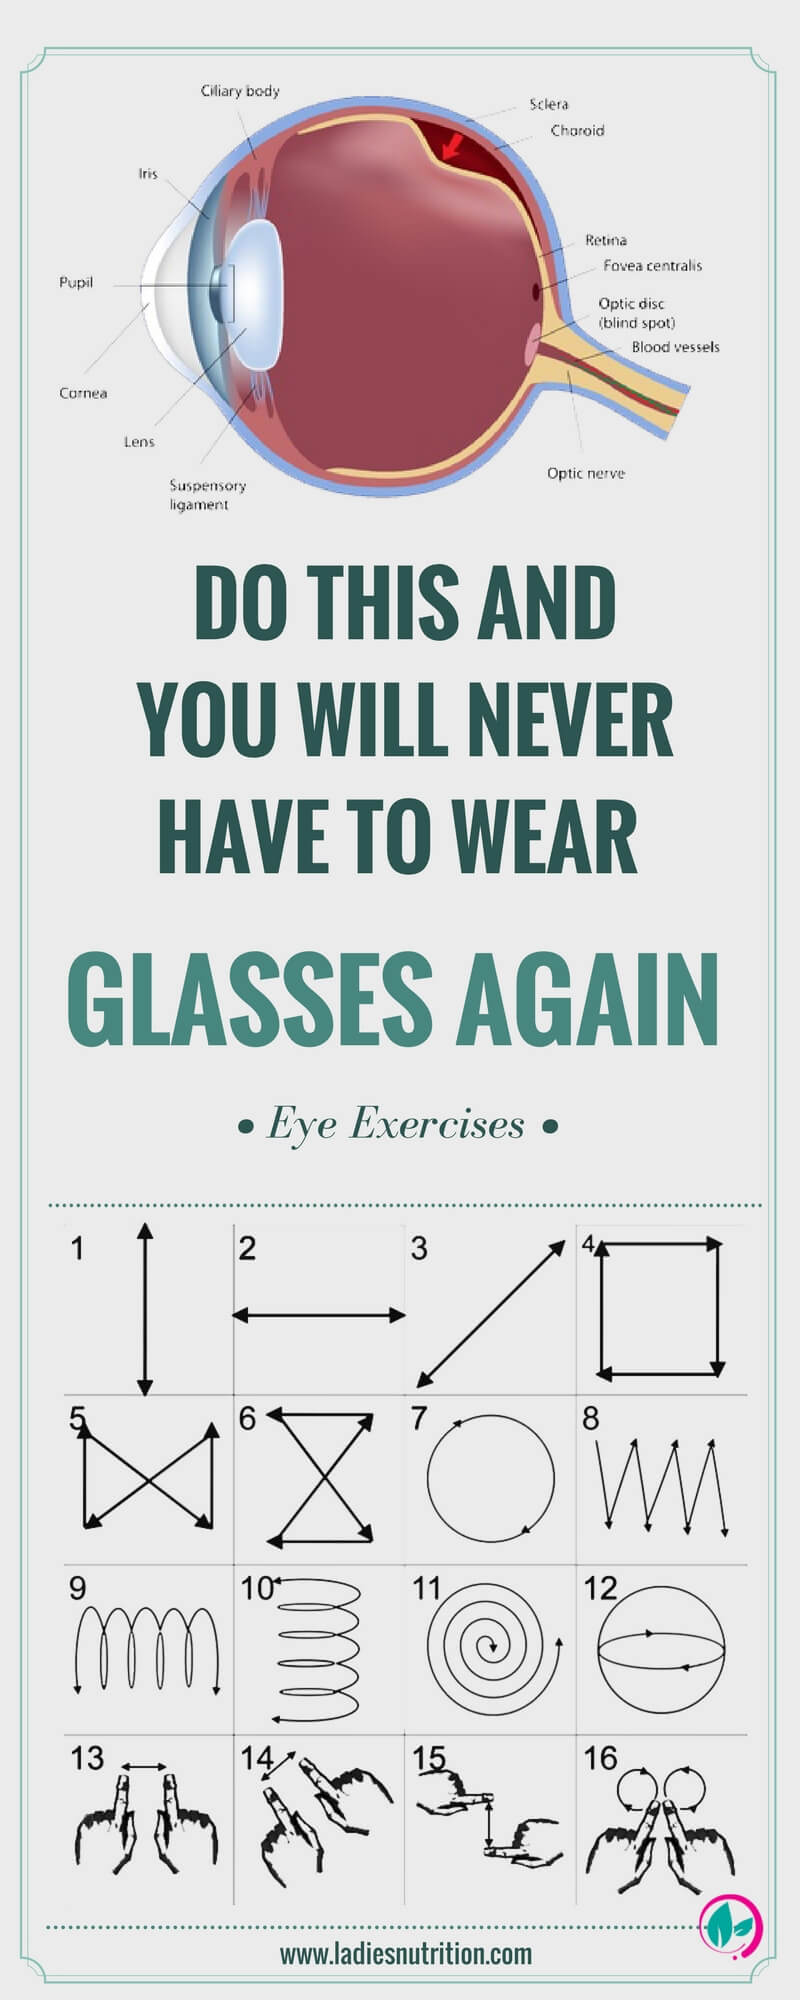 Do This And You Will Never Have To Wear Glasses Again ...